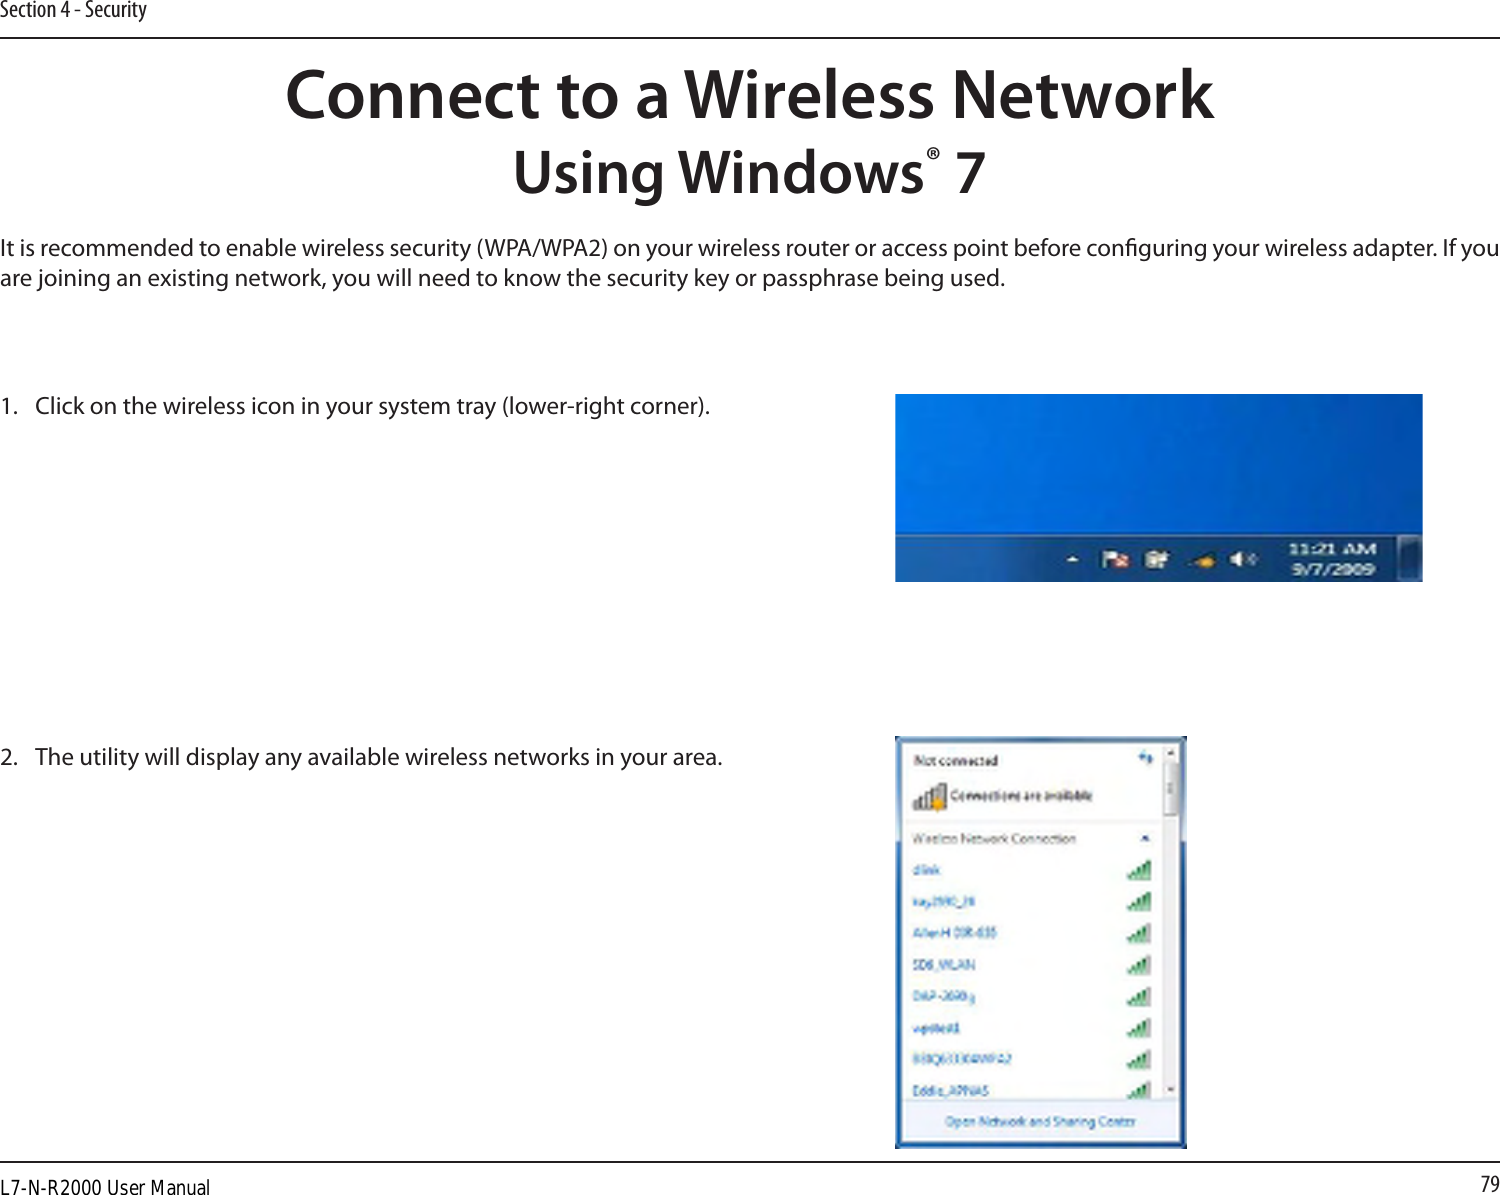 79Section 4 - SecurityConnect to a Wireless NetworkUsing Windows® 7It is recommended to enable wireless security (WPA/WPA2) on your wireless router or access point before conguring your wireless adapter. If you are joining an existing network, you will need to know the security key or passphrase being used.1.  Click on the wireless icon in your system tray (lower-right corner).2.  The utility will display any available wireless networks in your area.L7-N-R2000 User Manual